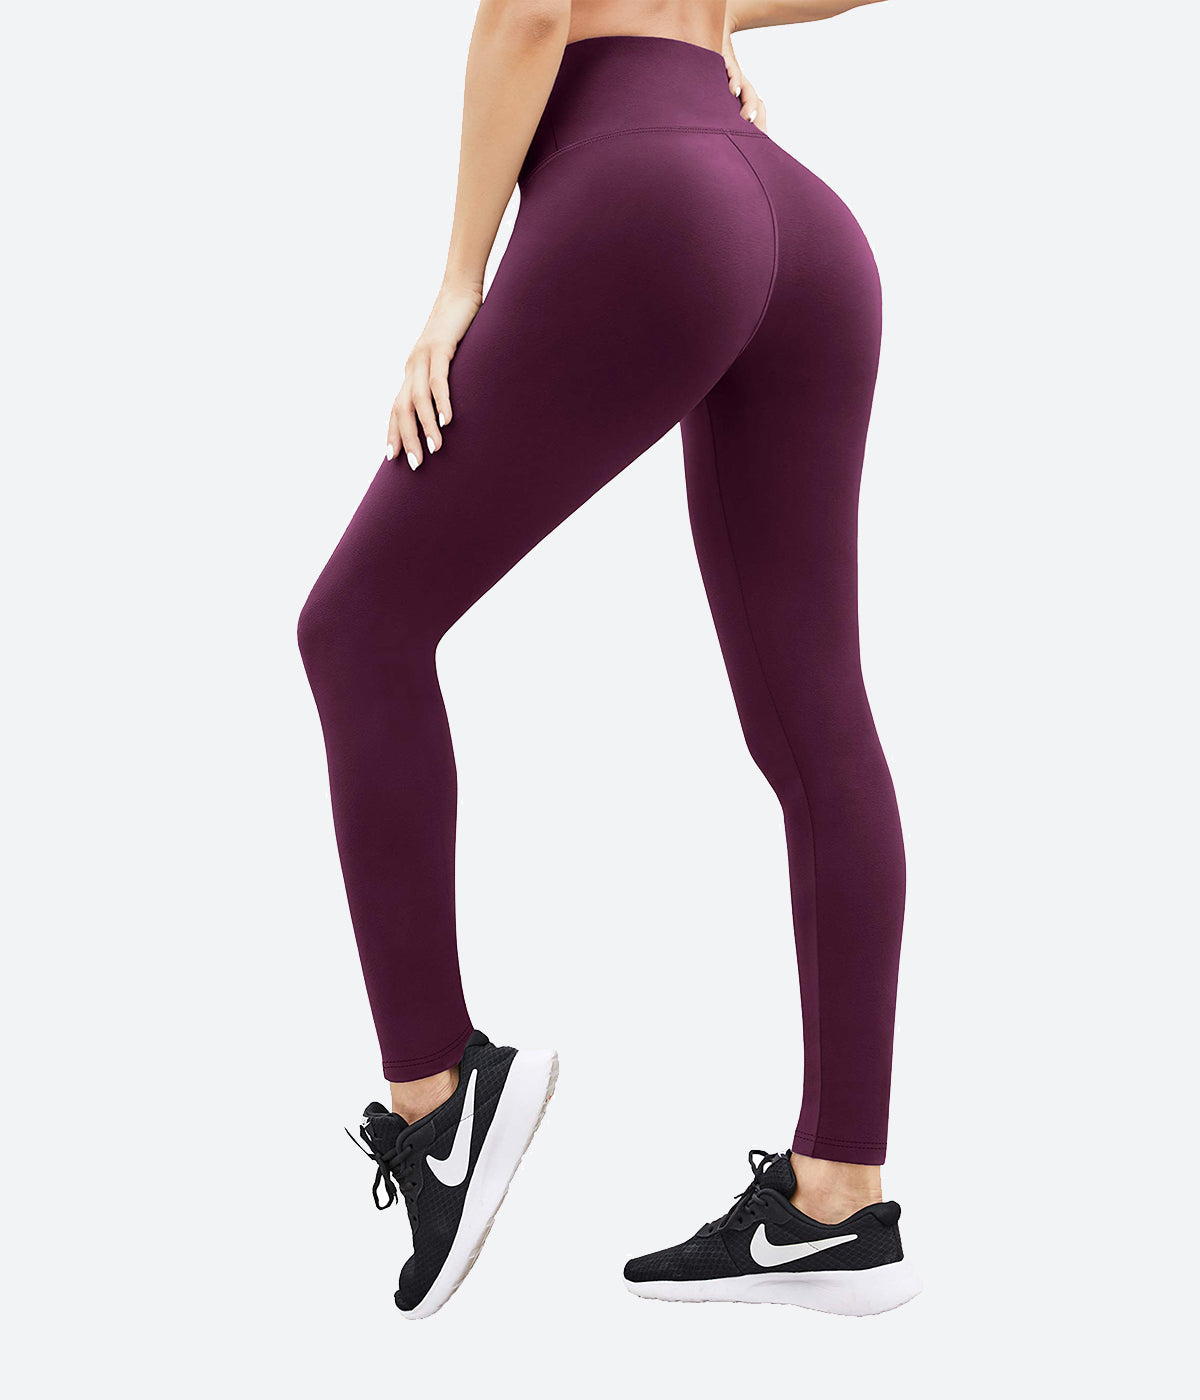 Super Stretchy Workout Yoga Pants with Pockets - HY60 - Dark Red / S-M